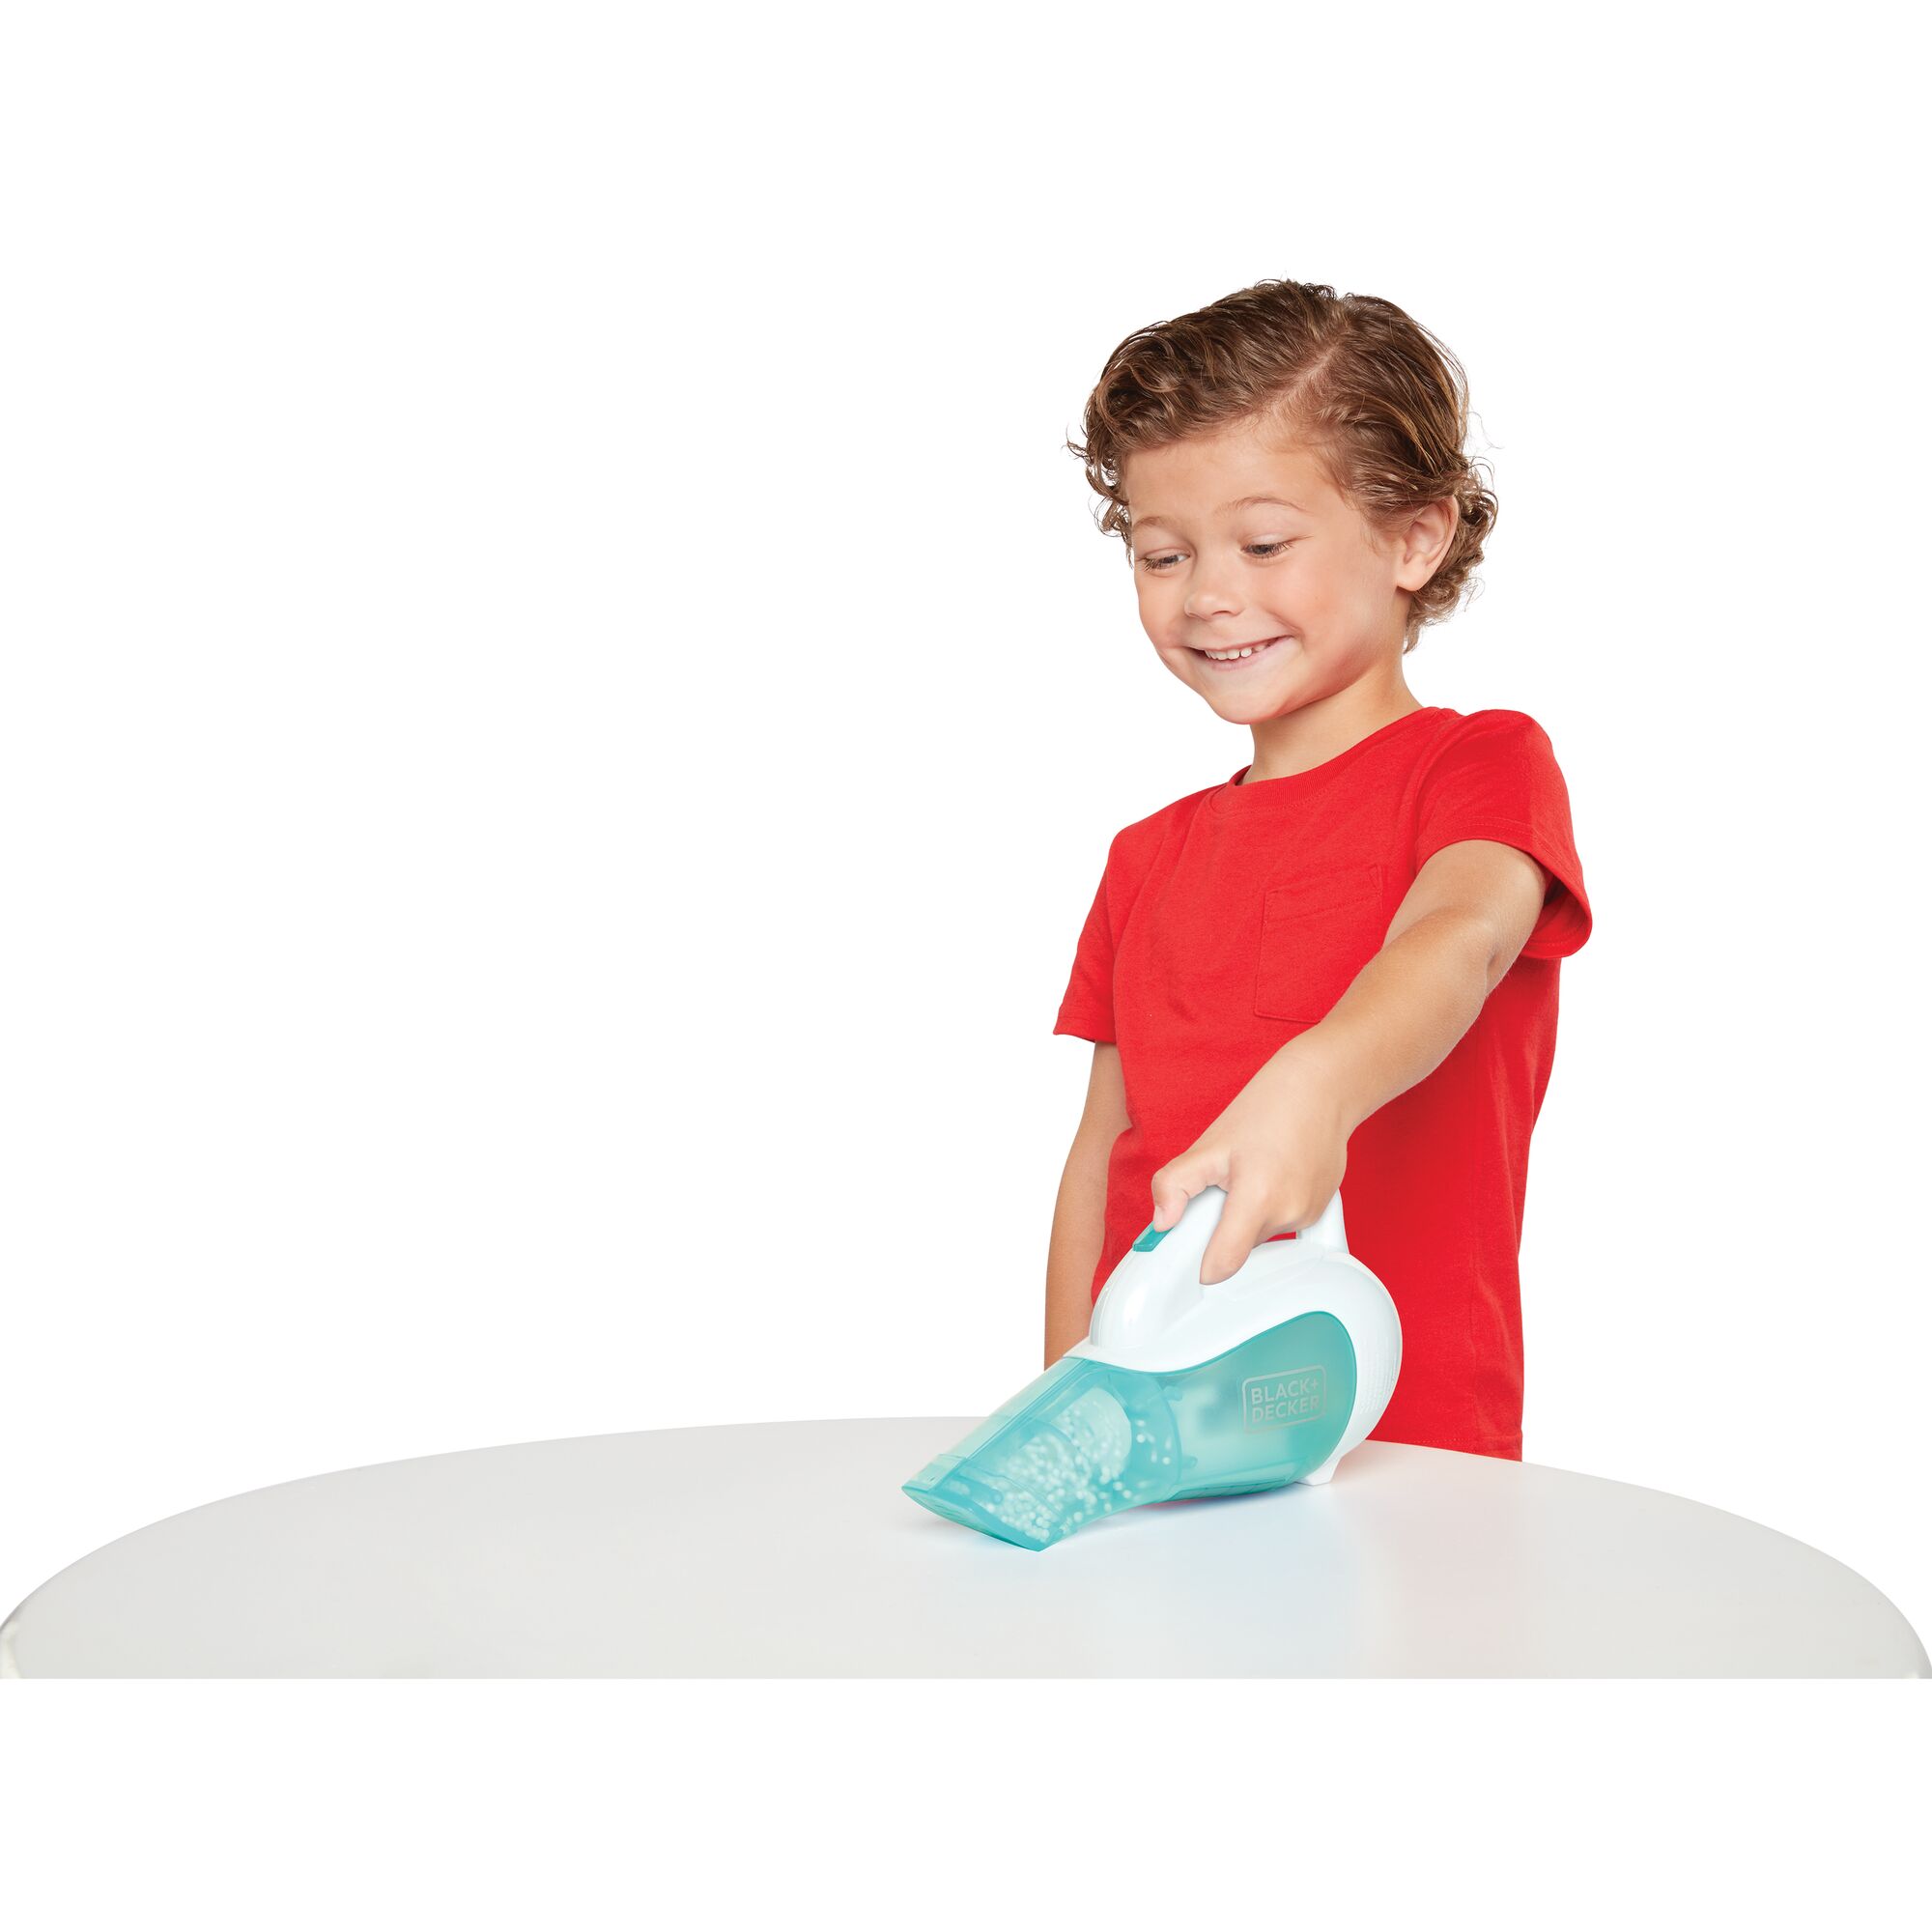 Junior toy dustbuster being used by a child.